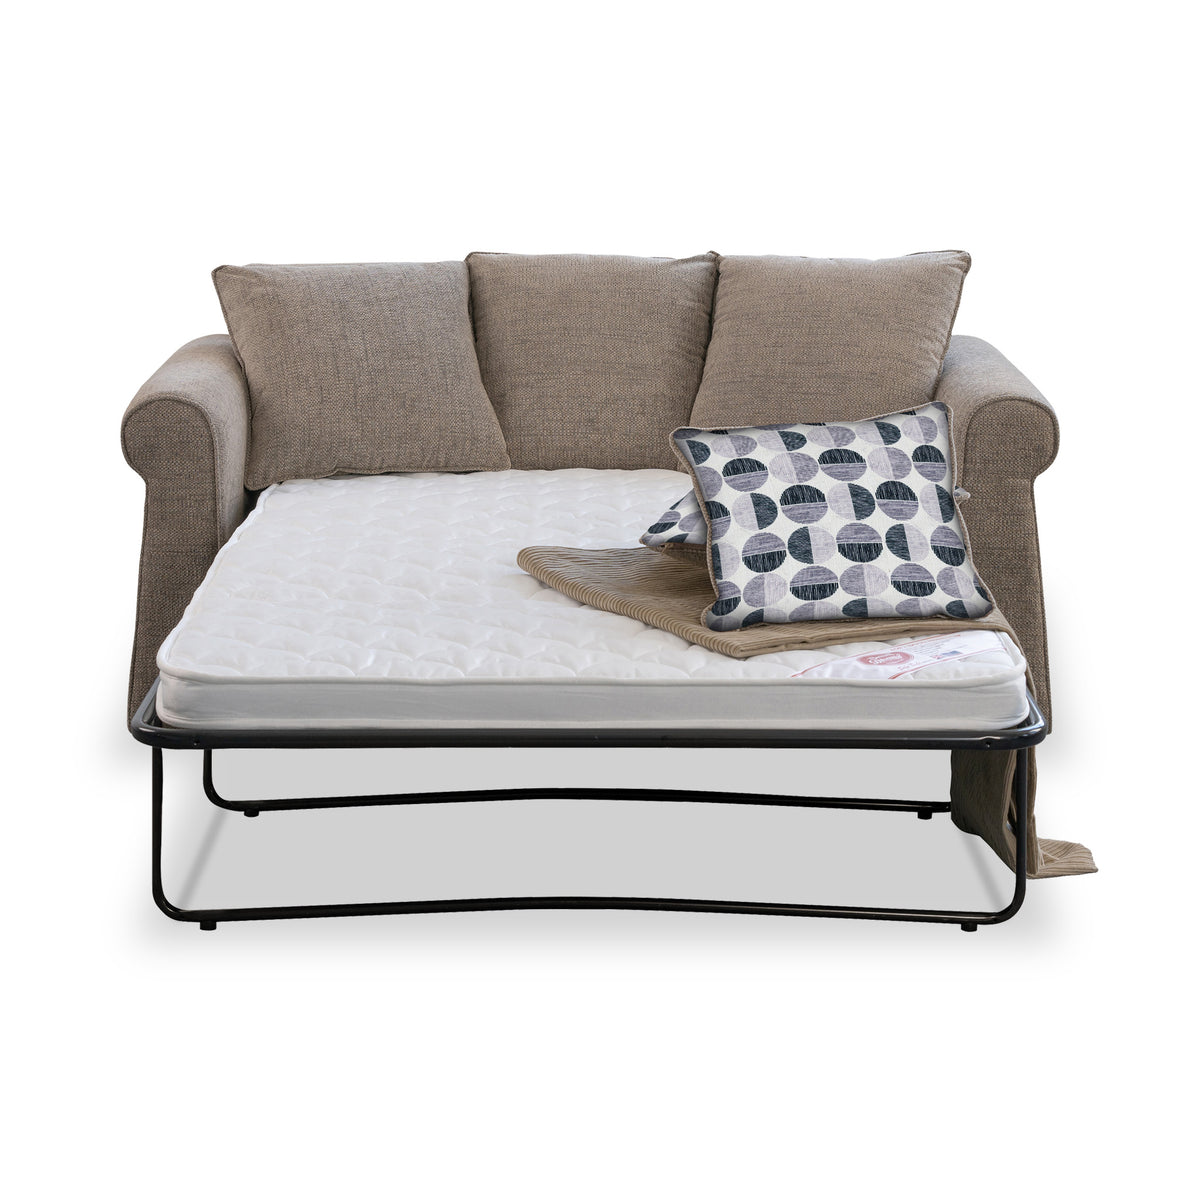 Branston Fawn Soft Weave 2 Seater Sofabed with Mono Scatter Cushions from Roseland Furniture